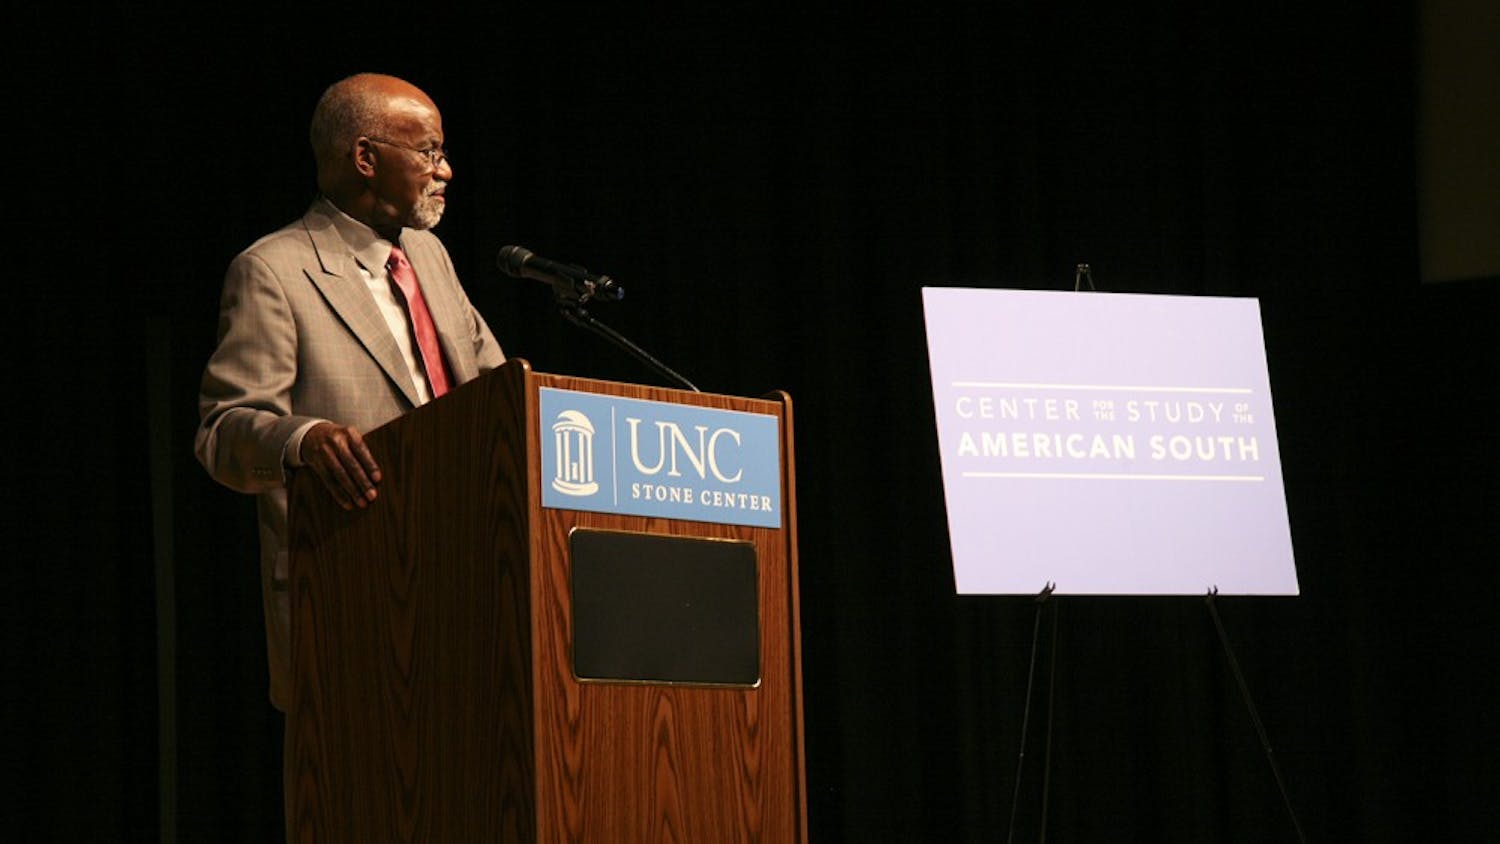 James E. Ferguson II speaks to students, professors, and Carolina Alumni in the Stone Center theater on Tuesday night. Ferguson focuses his lecture on the Voting Rights Act and its implementation over the past fifty years. He also discusses the topic of race in the American south and how "everything is different, but not much has changed."